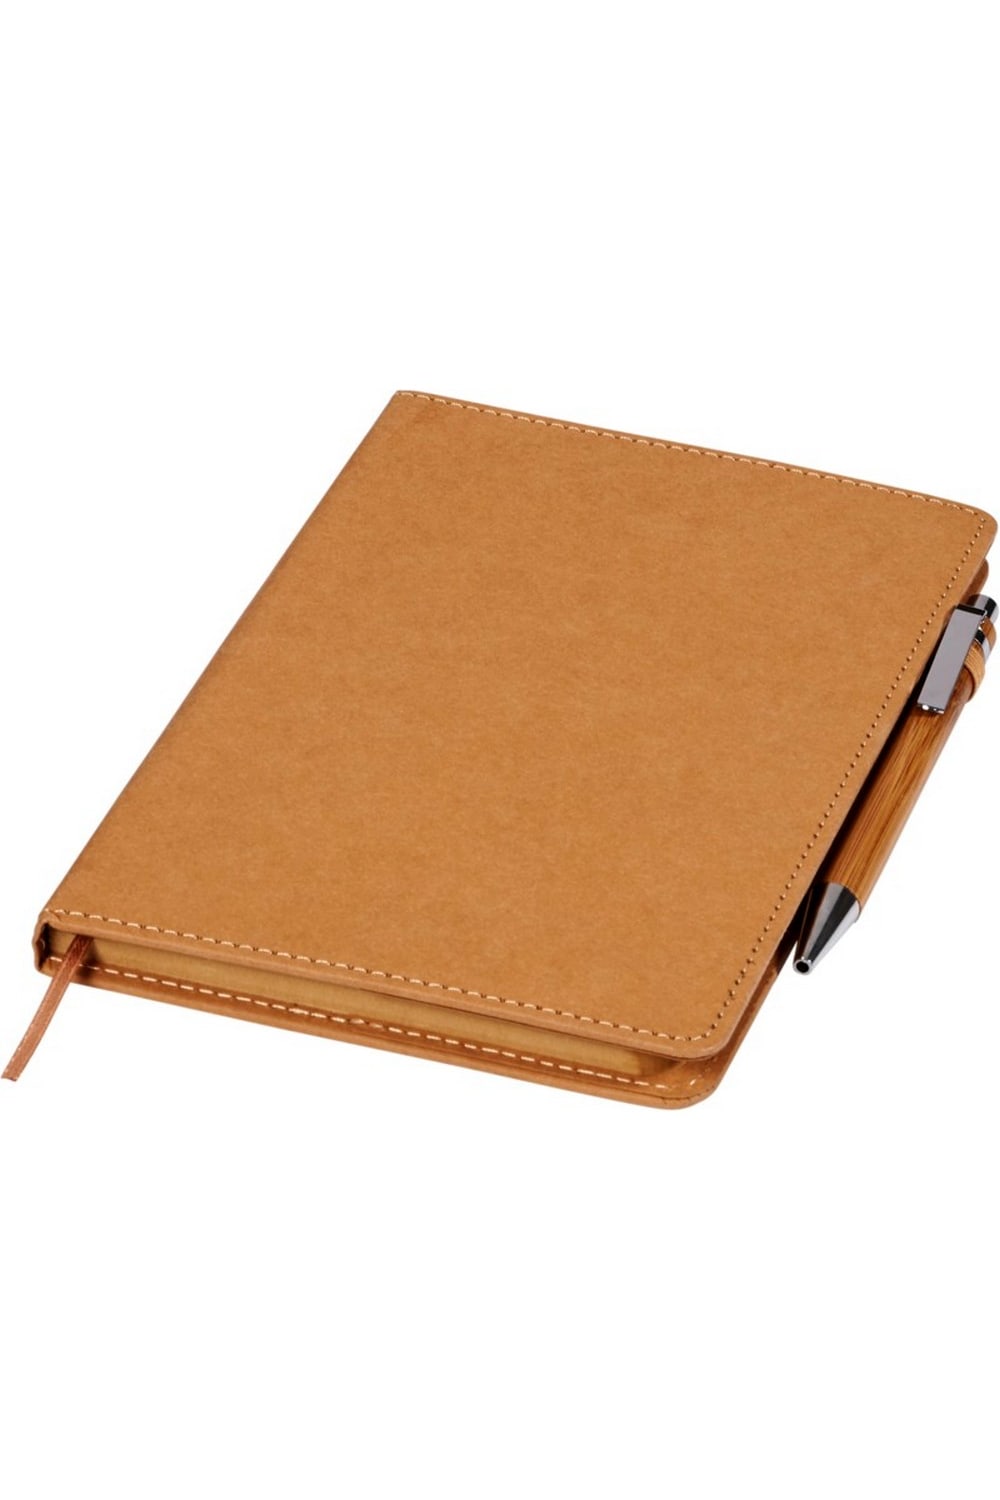 Bullet Celuk Ballpoint Pen And Notebook Set (Brown) (One Size)